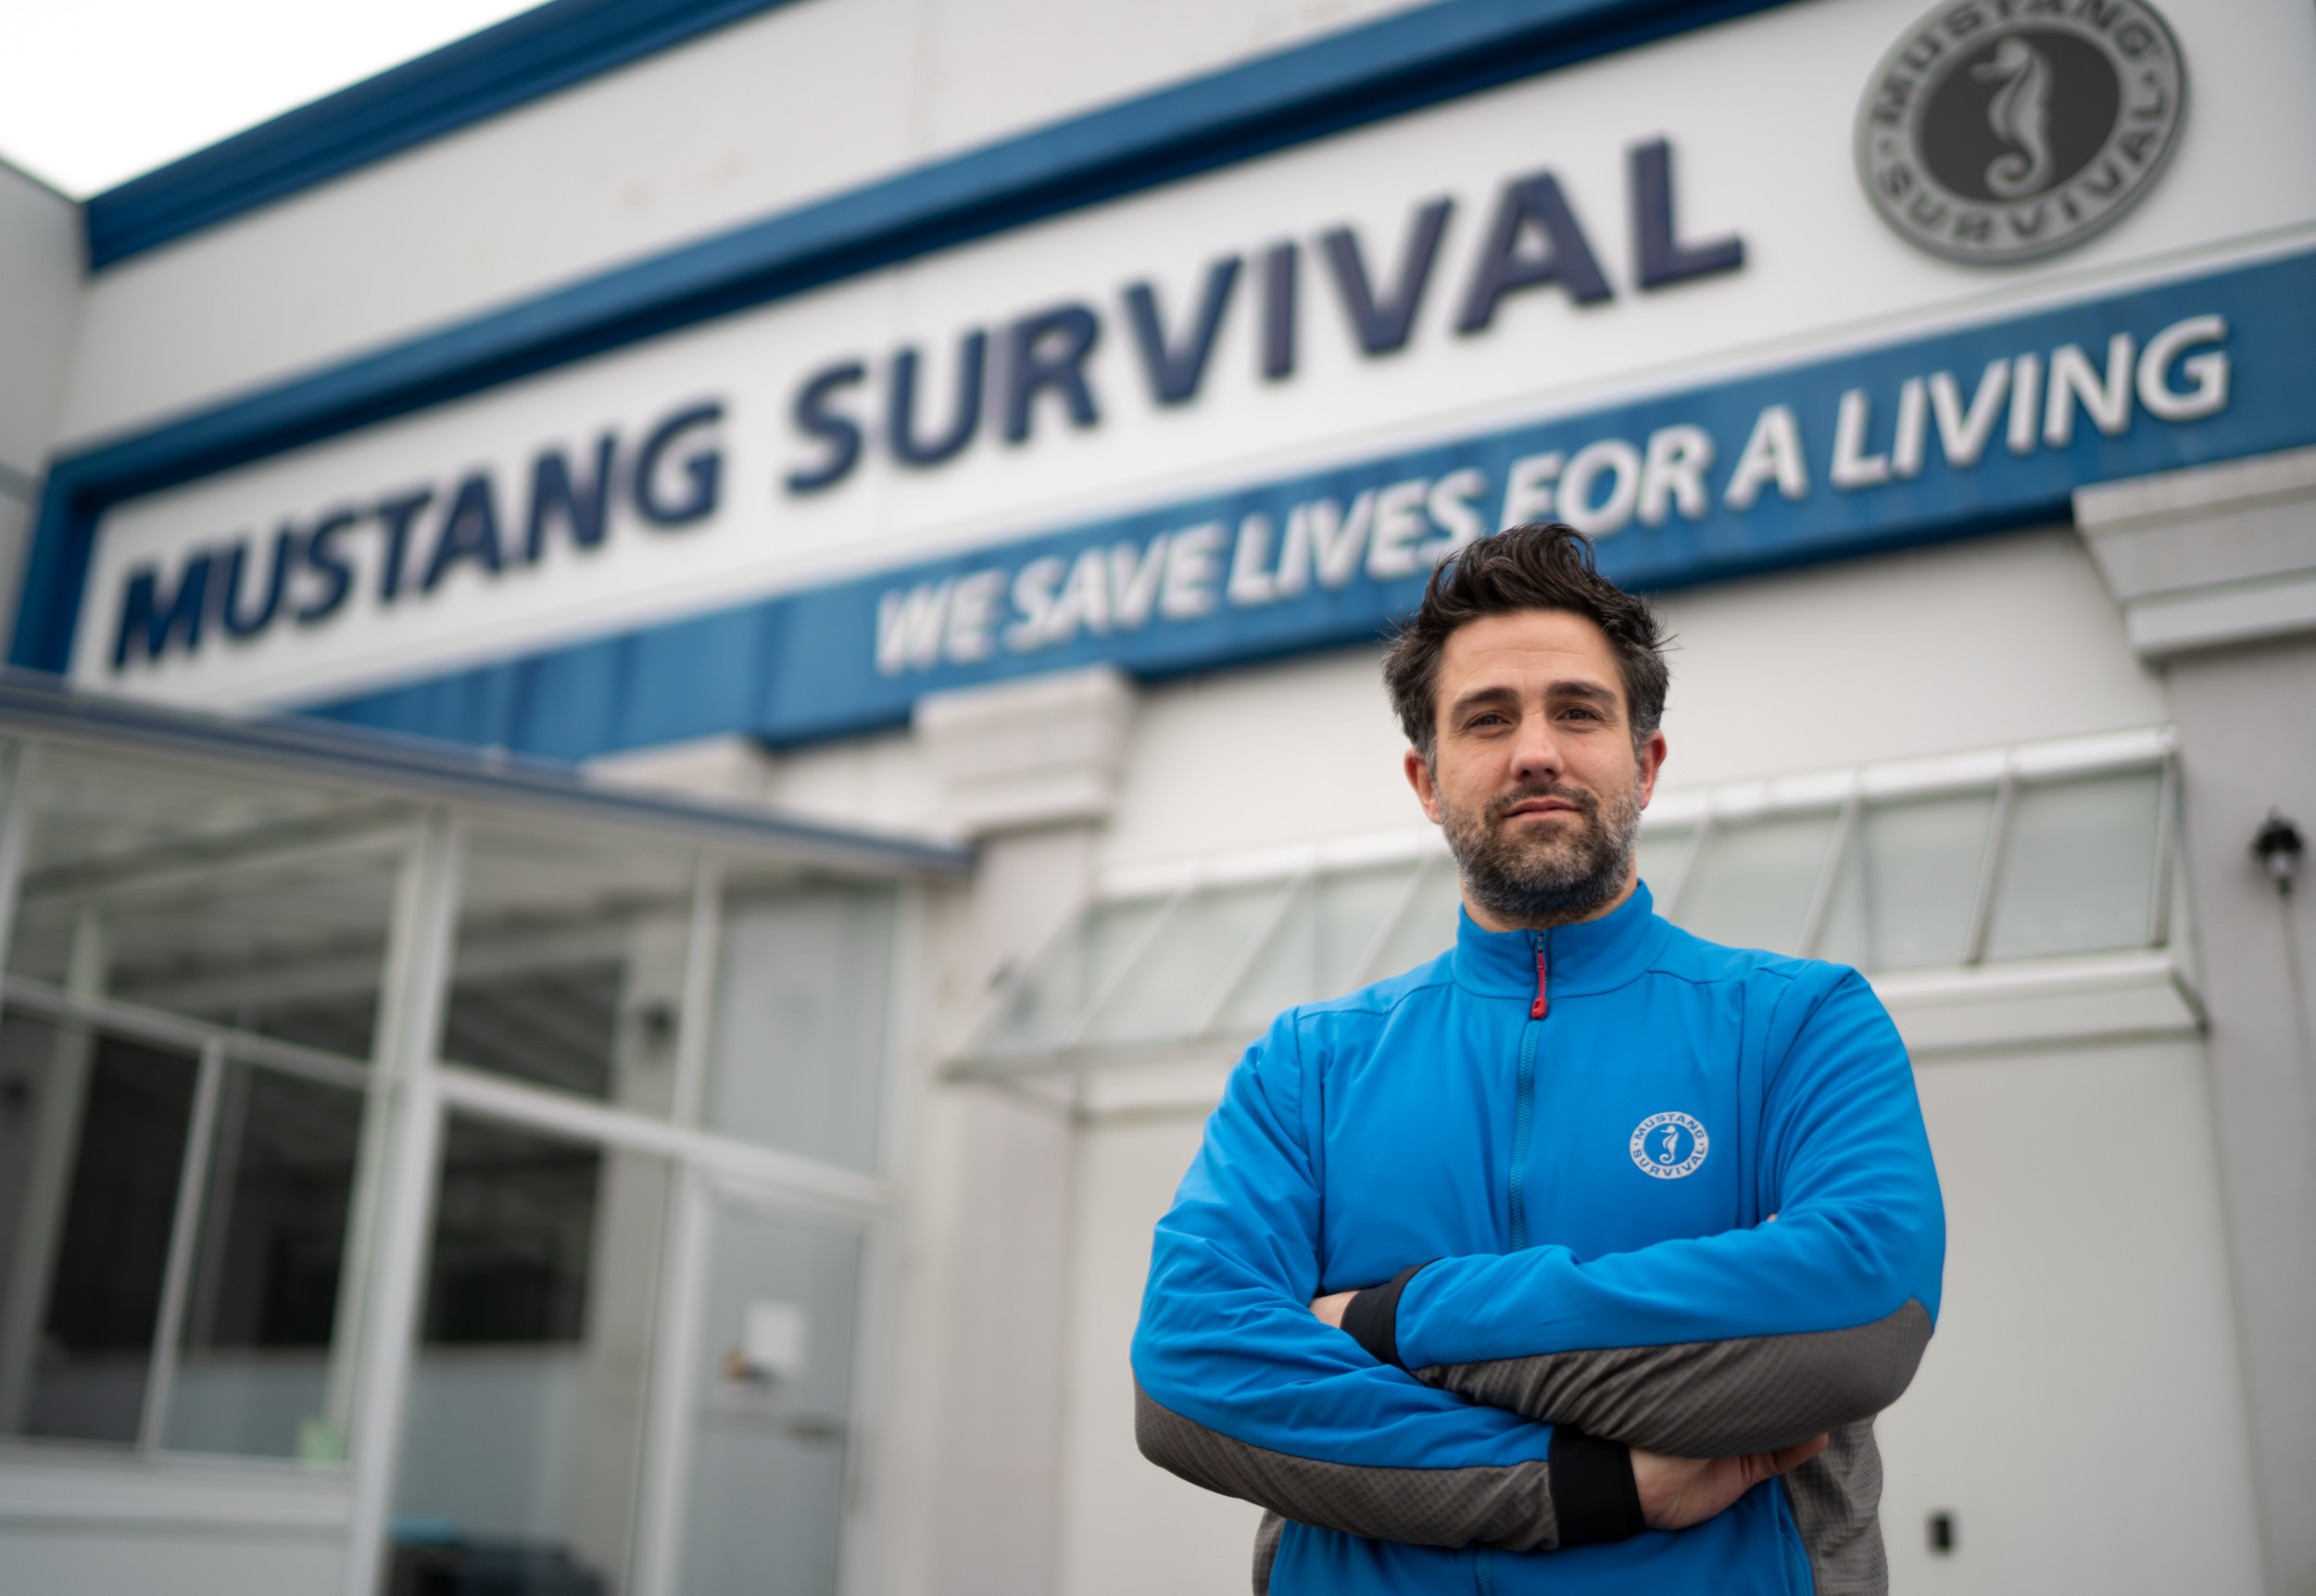 Man stands in front of Mustang Survival sign on building